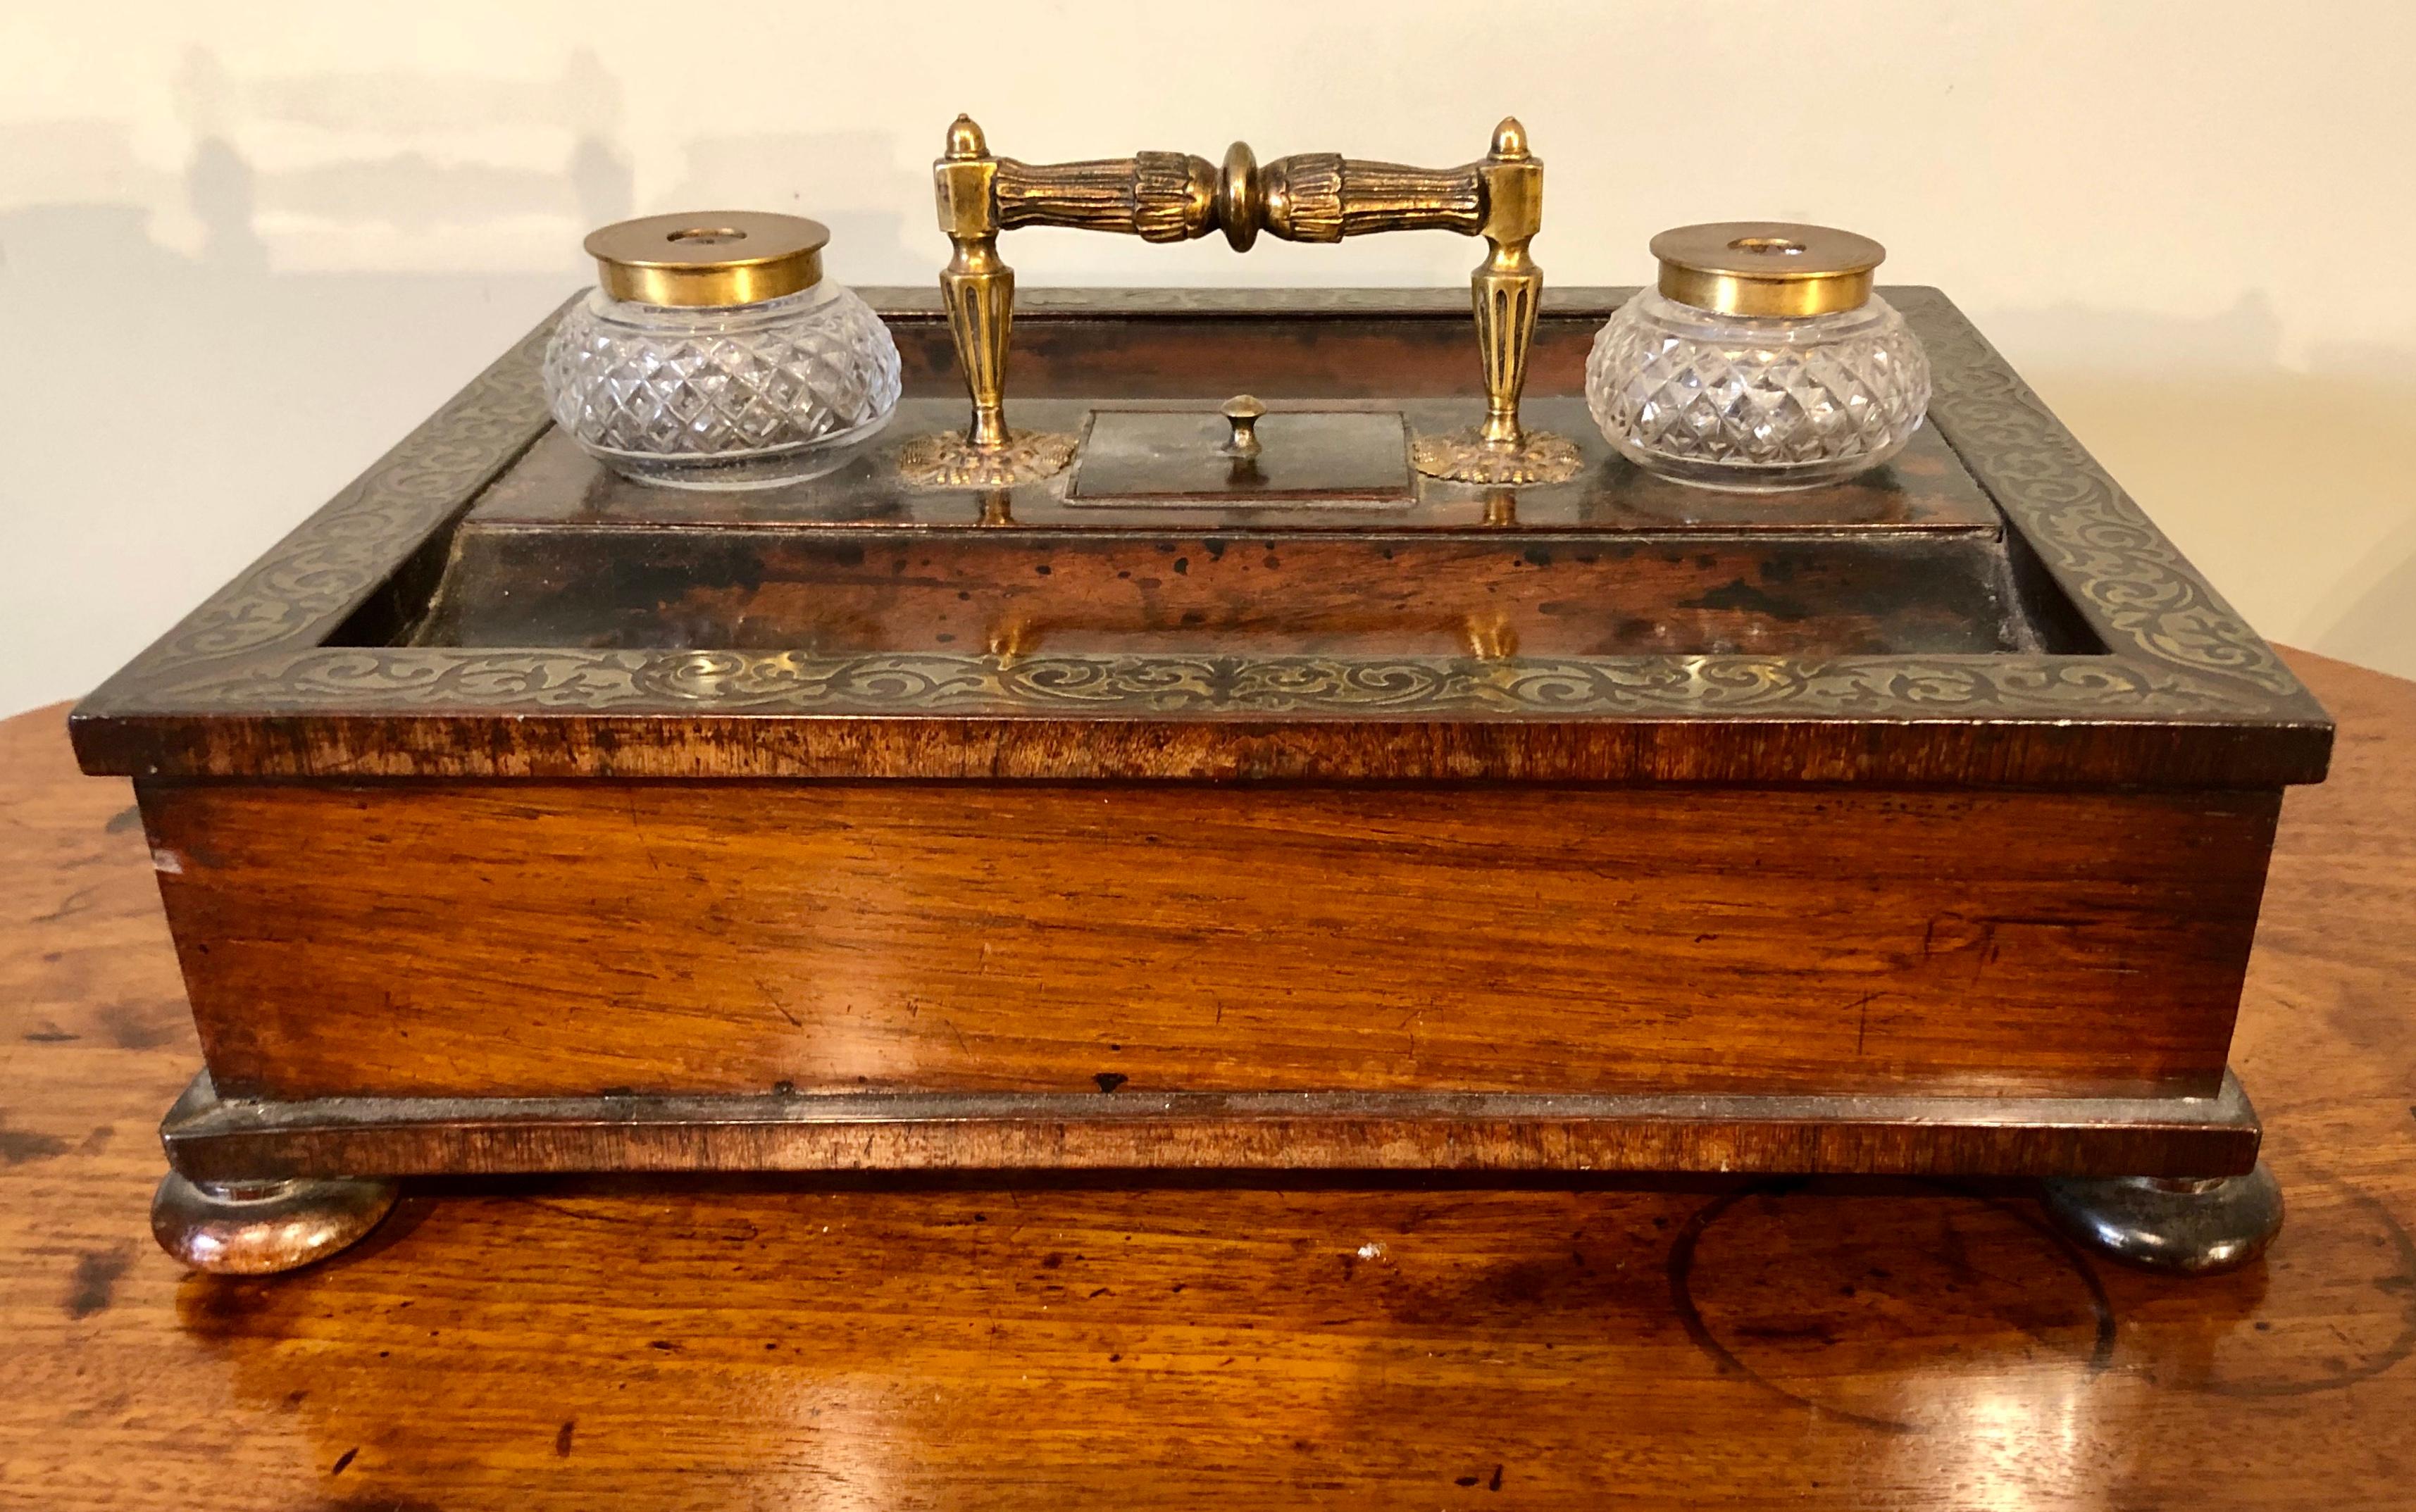 19th Century Regency Brass Inlaid Desk Pen and Ink Stand 4